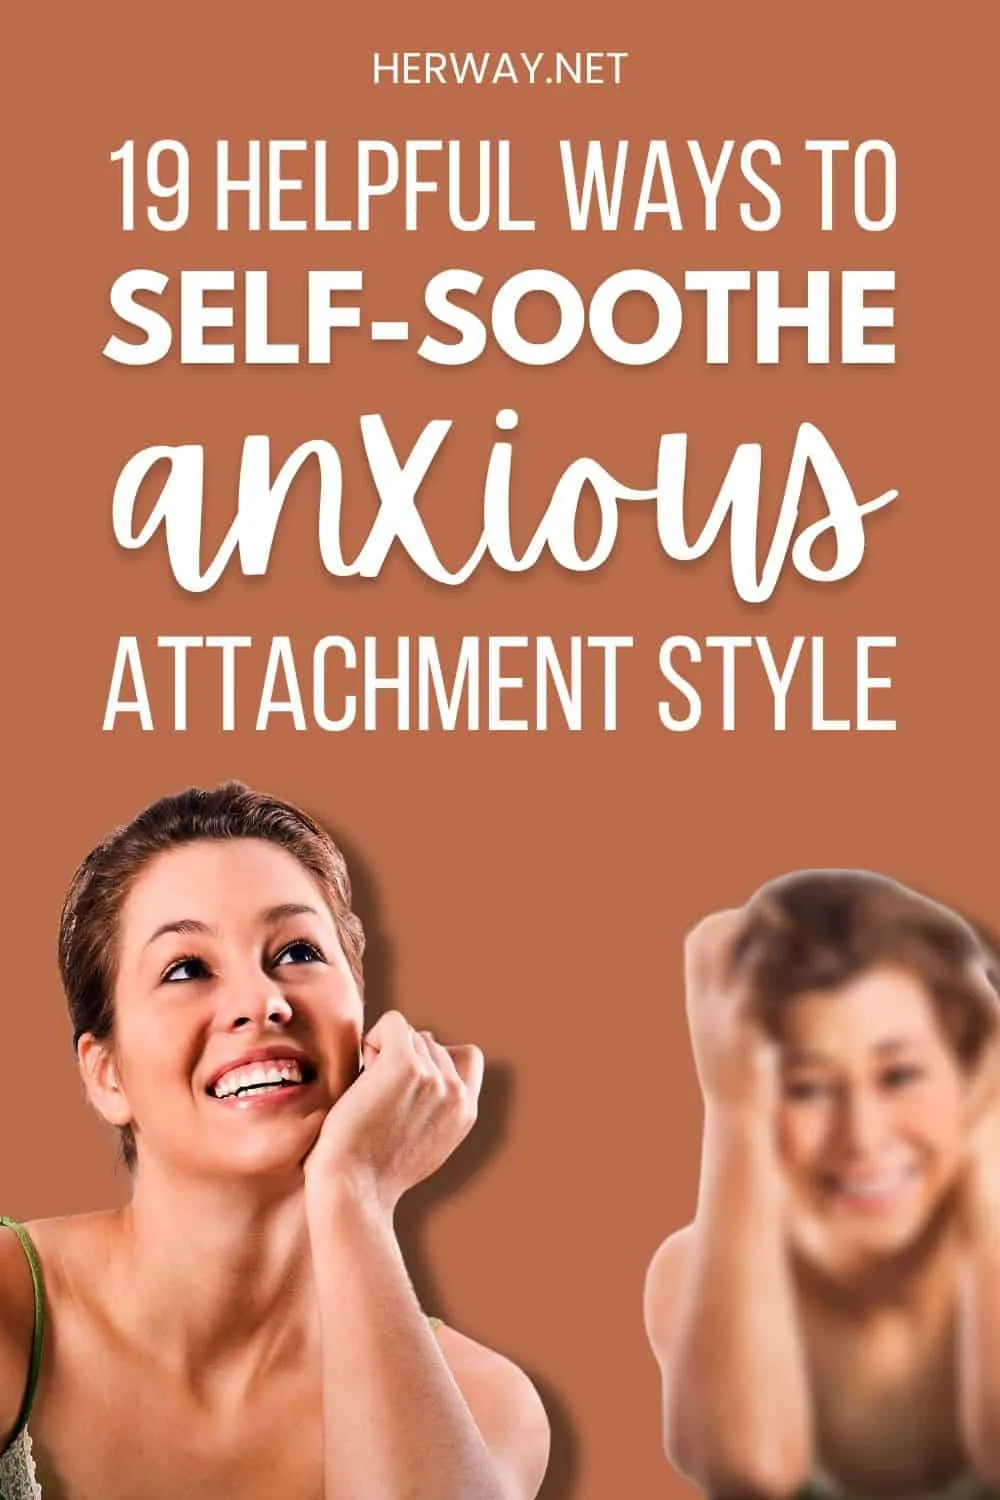 How To Self-Soothe Anxious Attachment Style (19 Helpful Tips) Pinterest